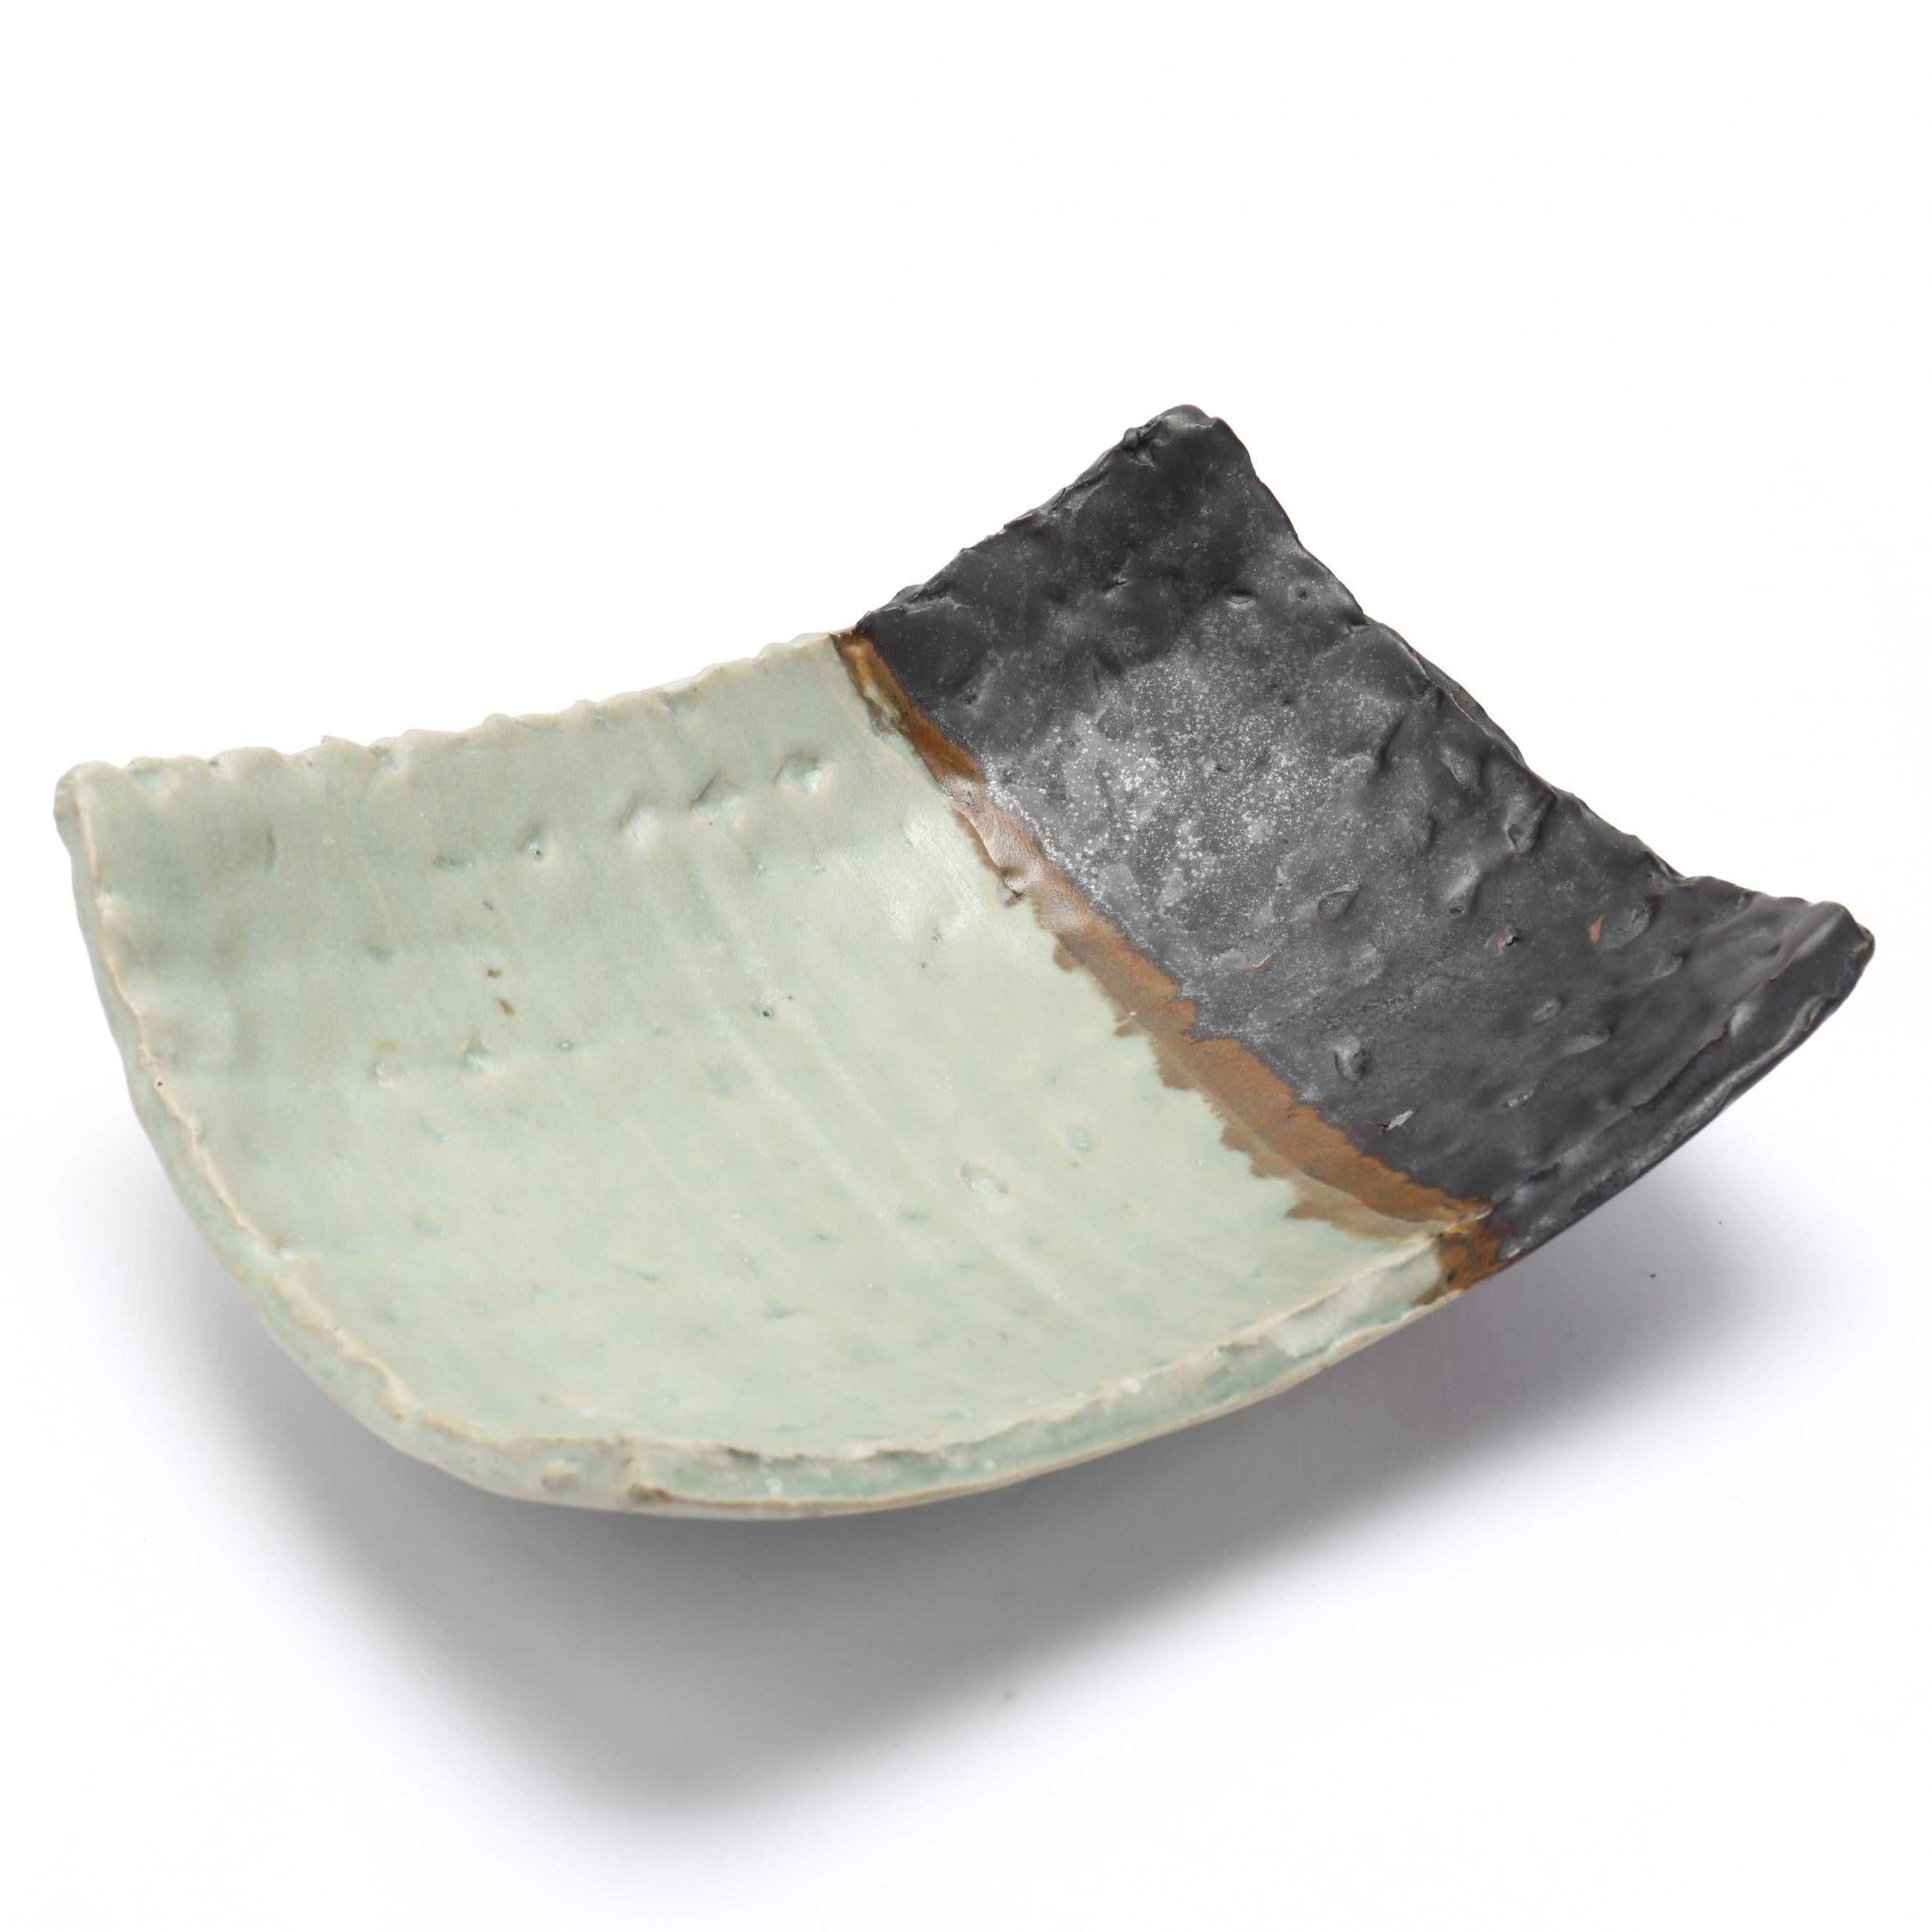 One-of-a-kind, early hand-built rectangular dish with dimpled pattern in black and celadon glazes. Authenticity confirmed by artist. Lane's work is known around the world and is part of the permanent collection of the Museum of Decorative Arts,